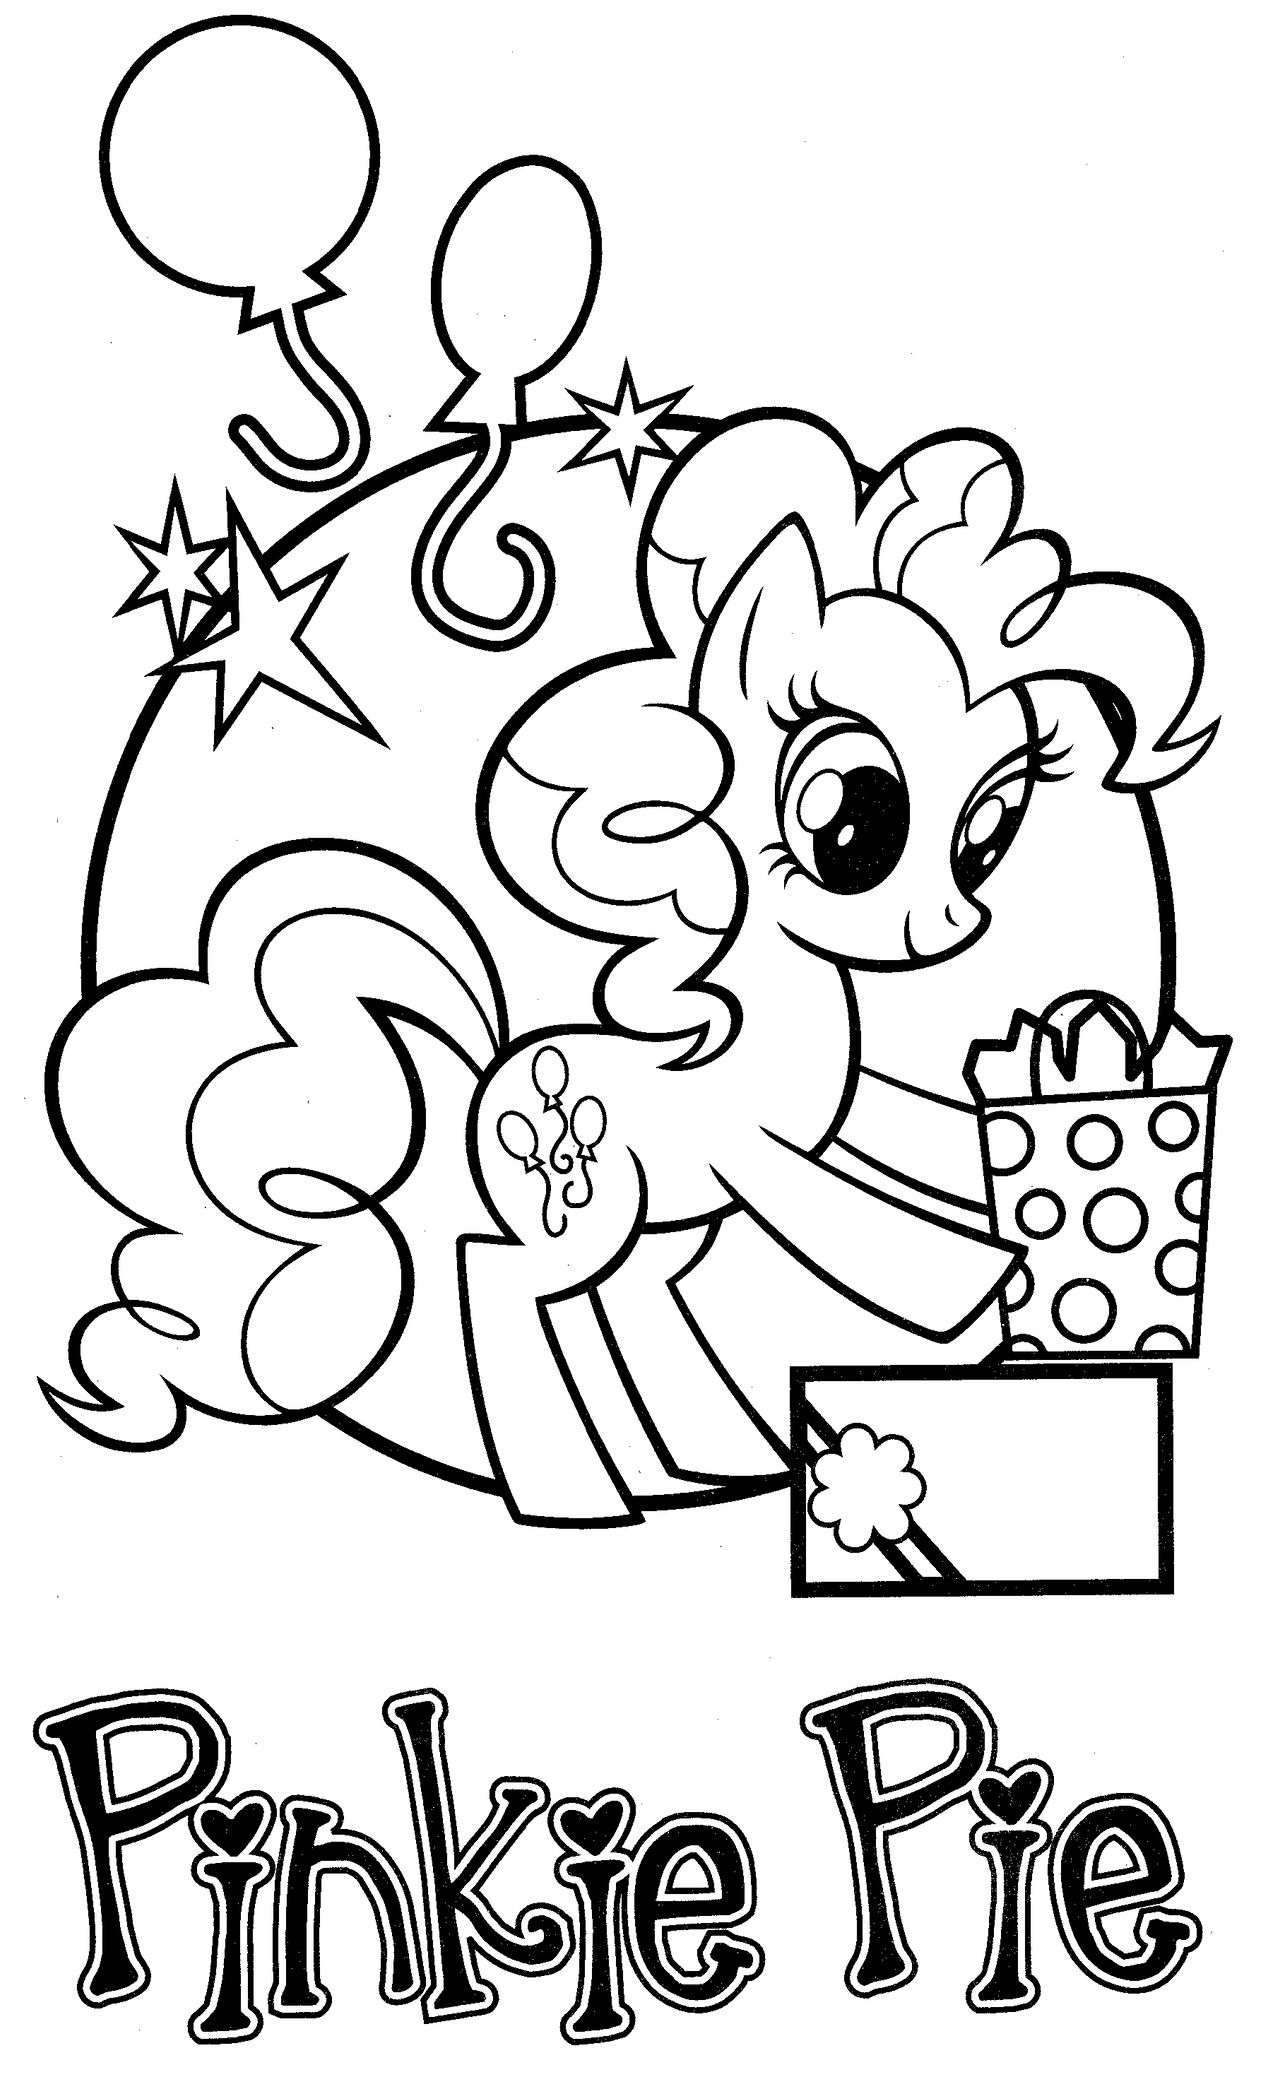 07 MLP My Little Pony coloring page by magnificent-coloring on DeviantArt